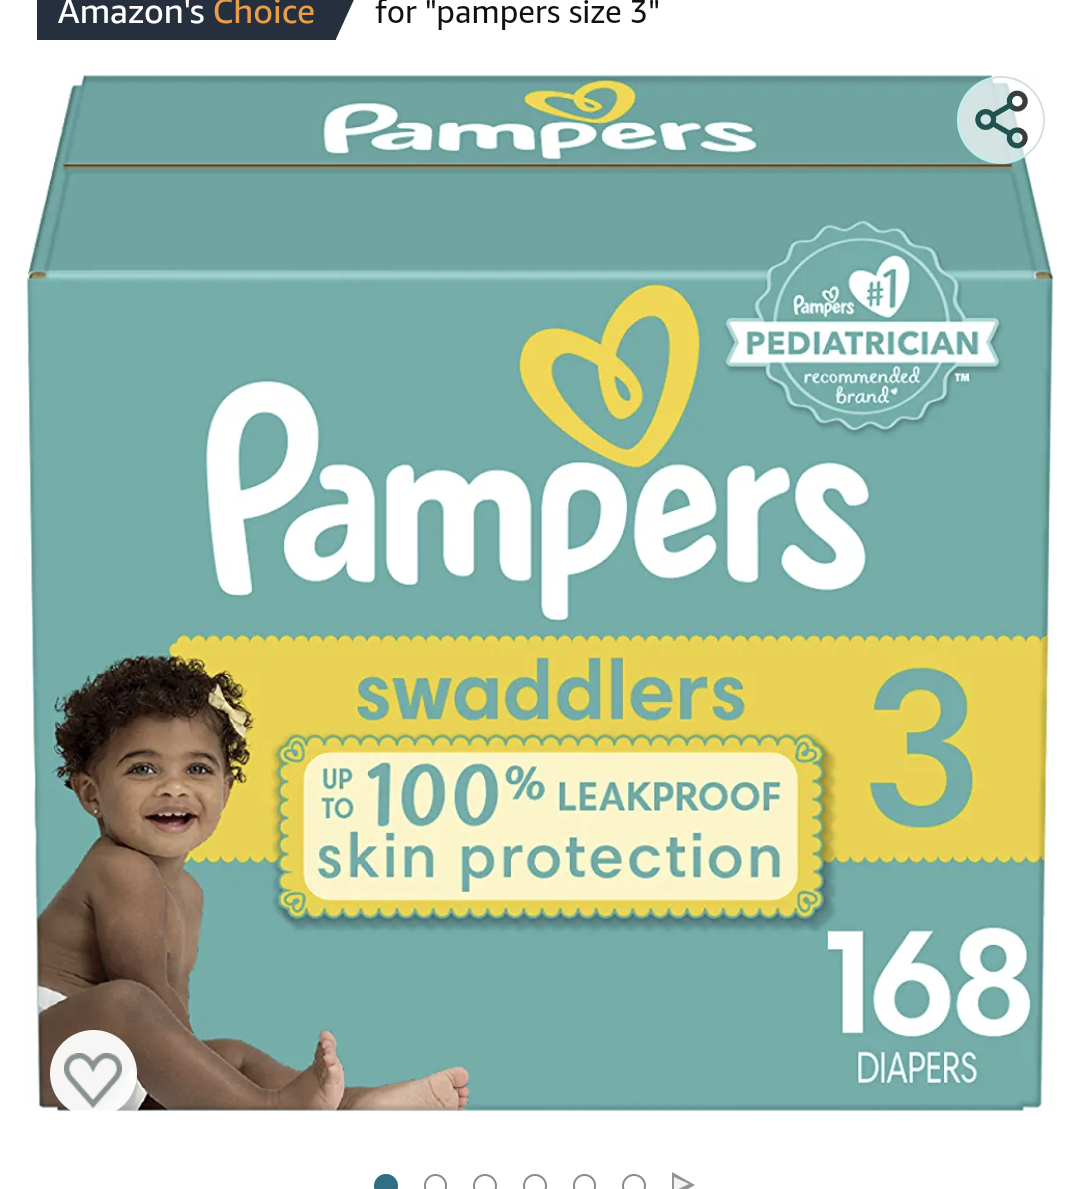 YMMV Prime Members Pampers Swaddlers Size 3 $20 off 2 box + $15 Amazon credit As Low as $59.49 $59.49